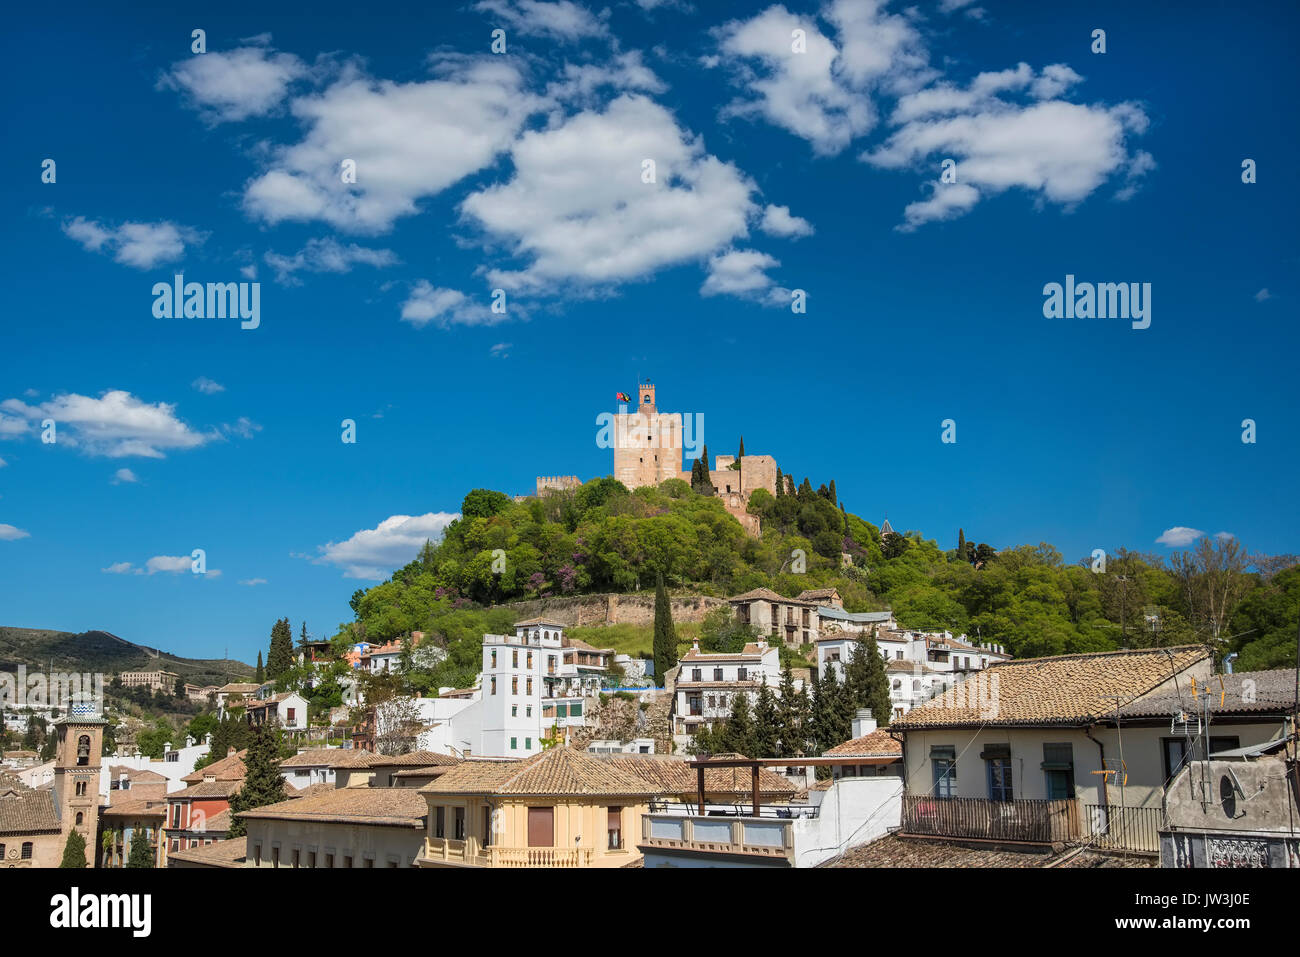 Spain, Andalusia, Granada, Plaza Nueva, Palace of Alhambra on hill Stock Photo